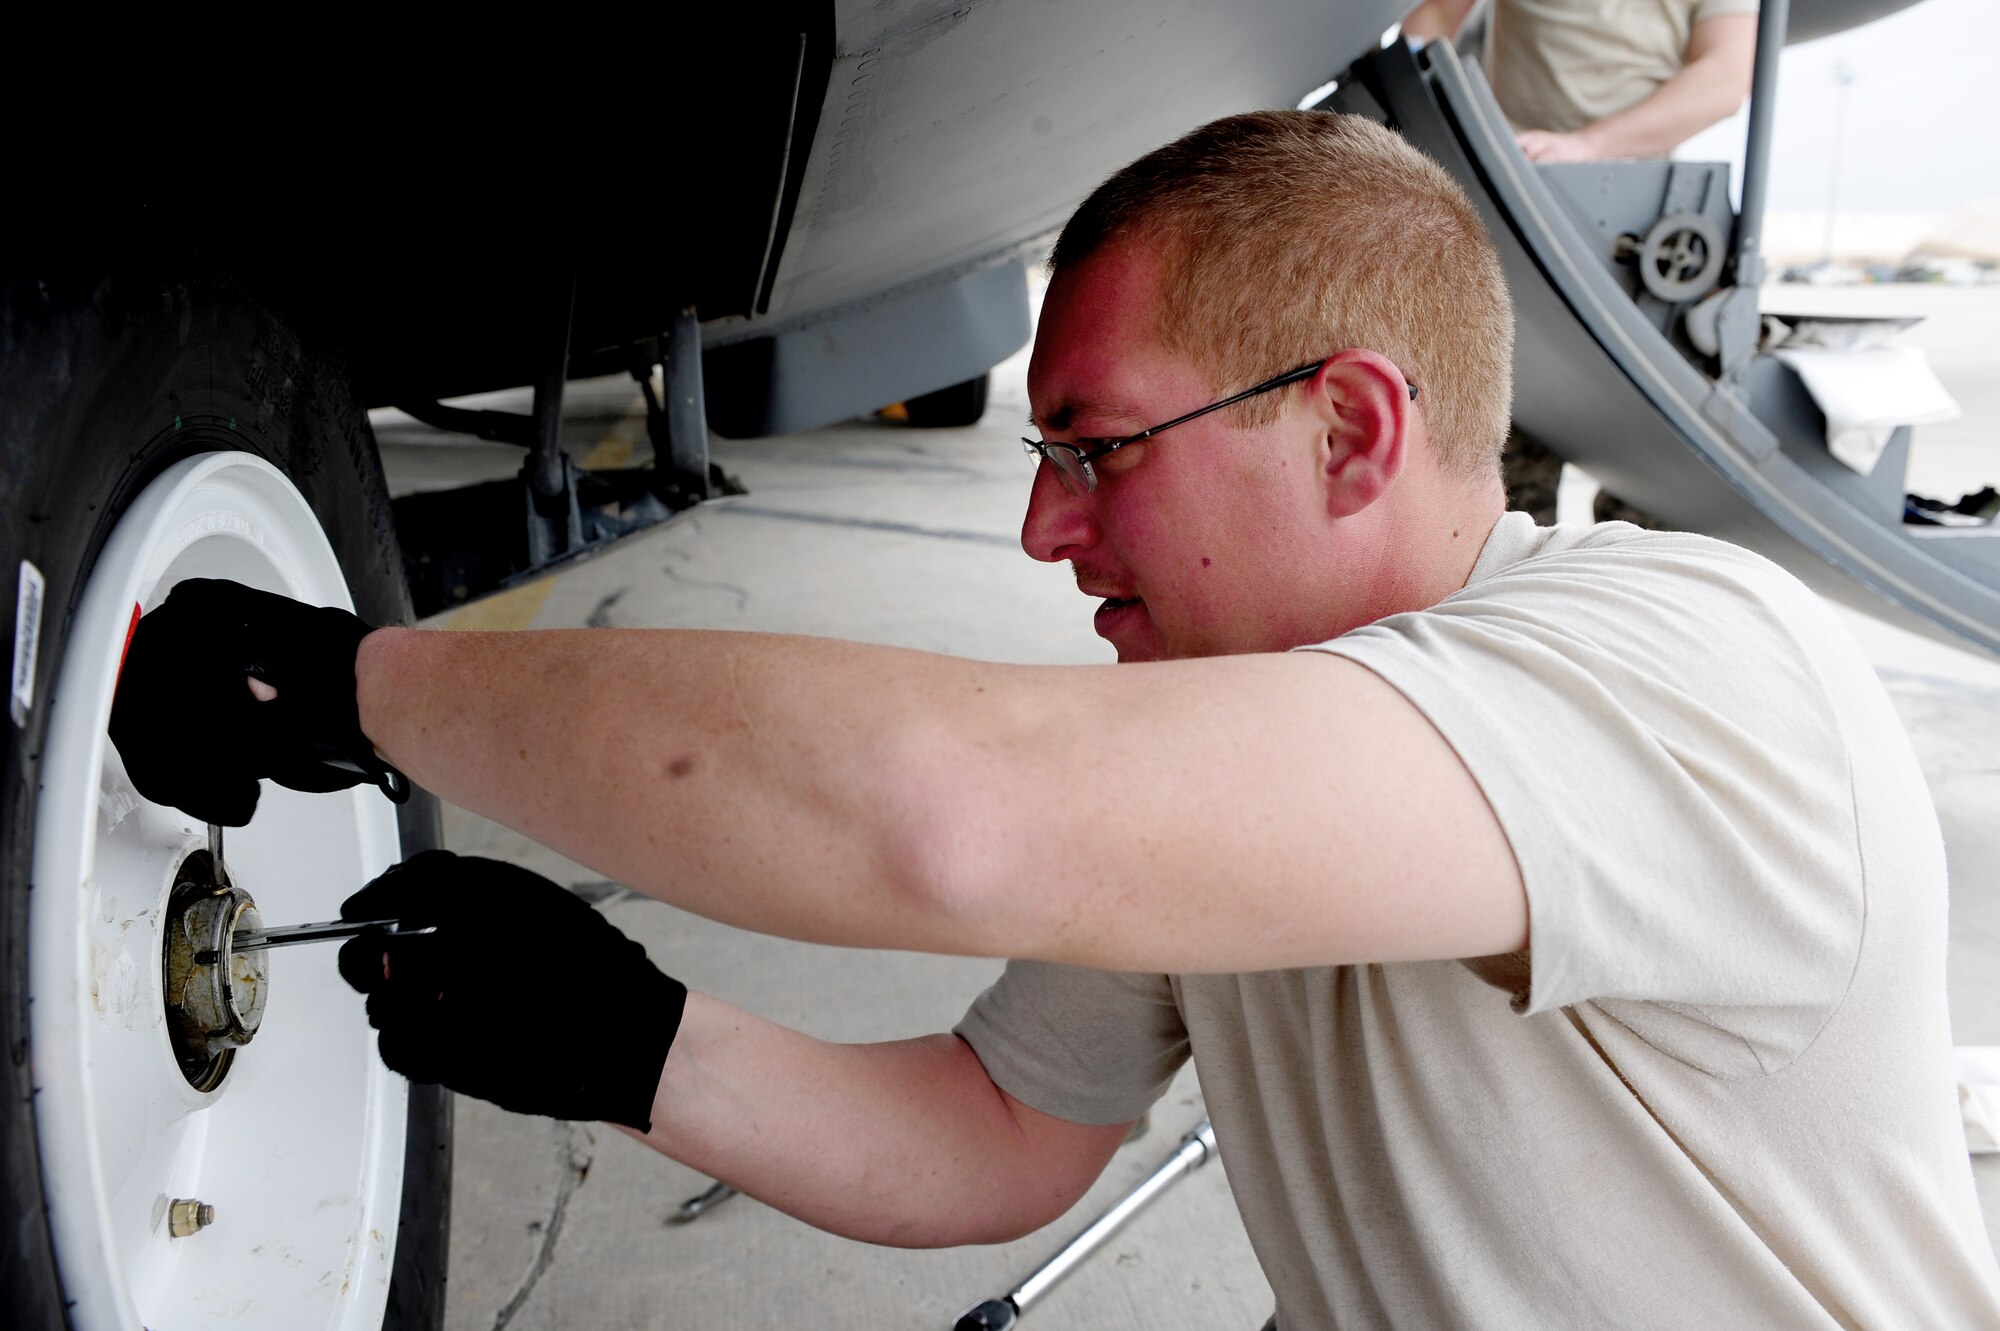 U.S. Air Force Staff Sgt. John Green, 455th Expeditionary Aircraft Maintenance Squadron crew chief, tightens a set screw onto the axel nut during a tire change procedure on a C-130 Hercules aircraft at Bagram Airfield, Afghanistan, April 9, 2011. Green is deployed from the Delaware Air National Guard’s 166th Aircraft Maintenance Squadron, New Castle, Del., supporting Operation Enduring Freedom. (U.S. Air Force photo/Master Sgt. William Greer)